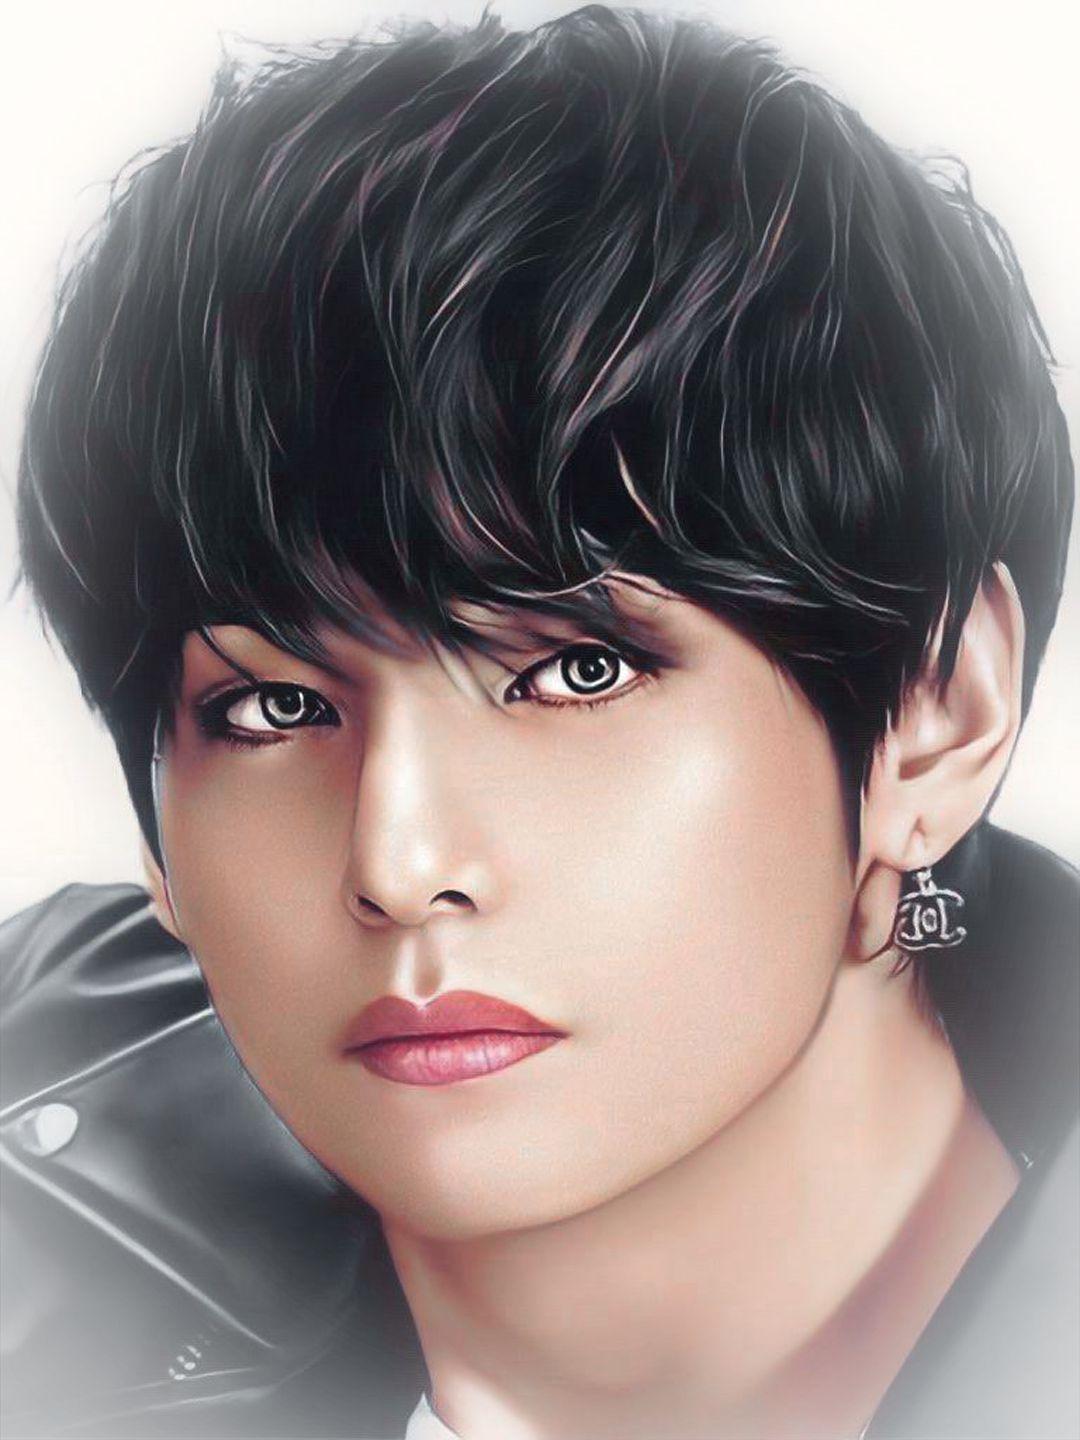 Drawing BTS-V From DNA MV |방탄소년단|How to draw BTS V |Kim Taehyung Sketch  easy step by step |김태형 - YouTube